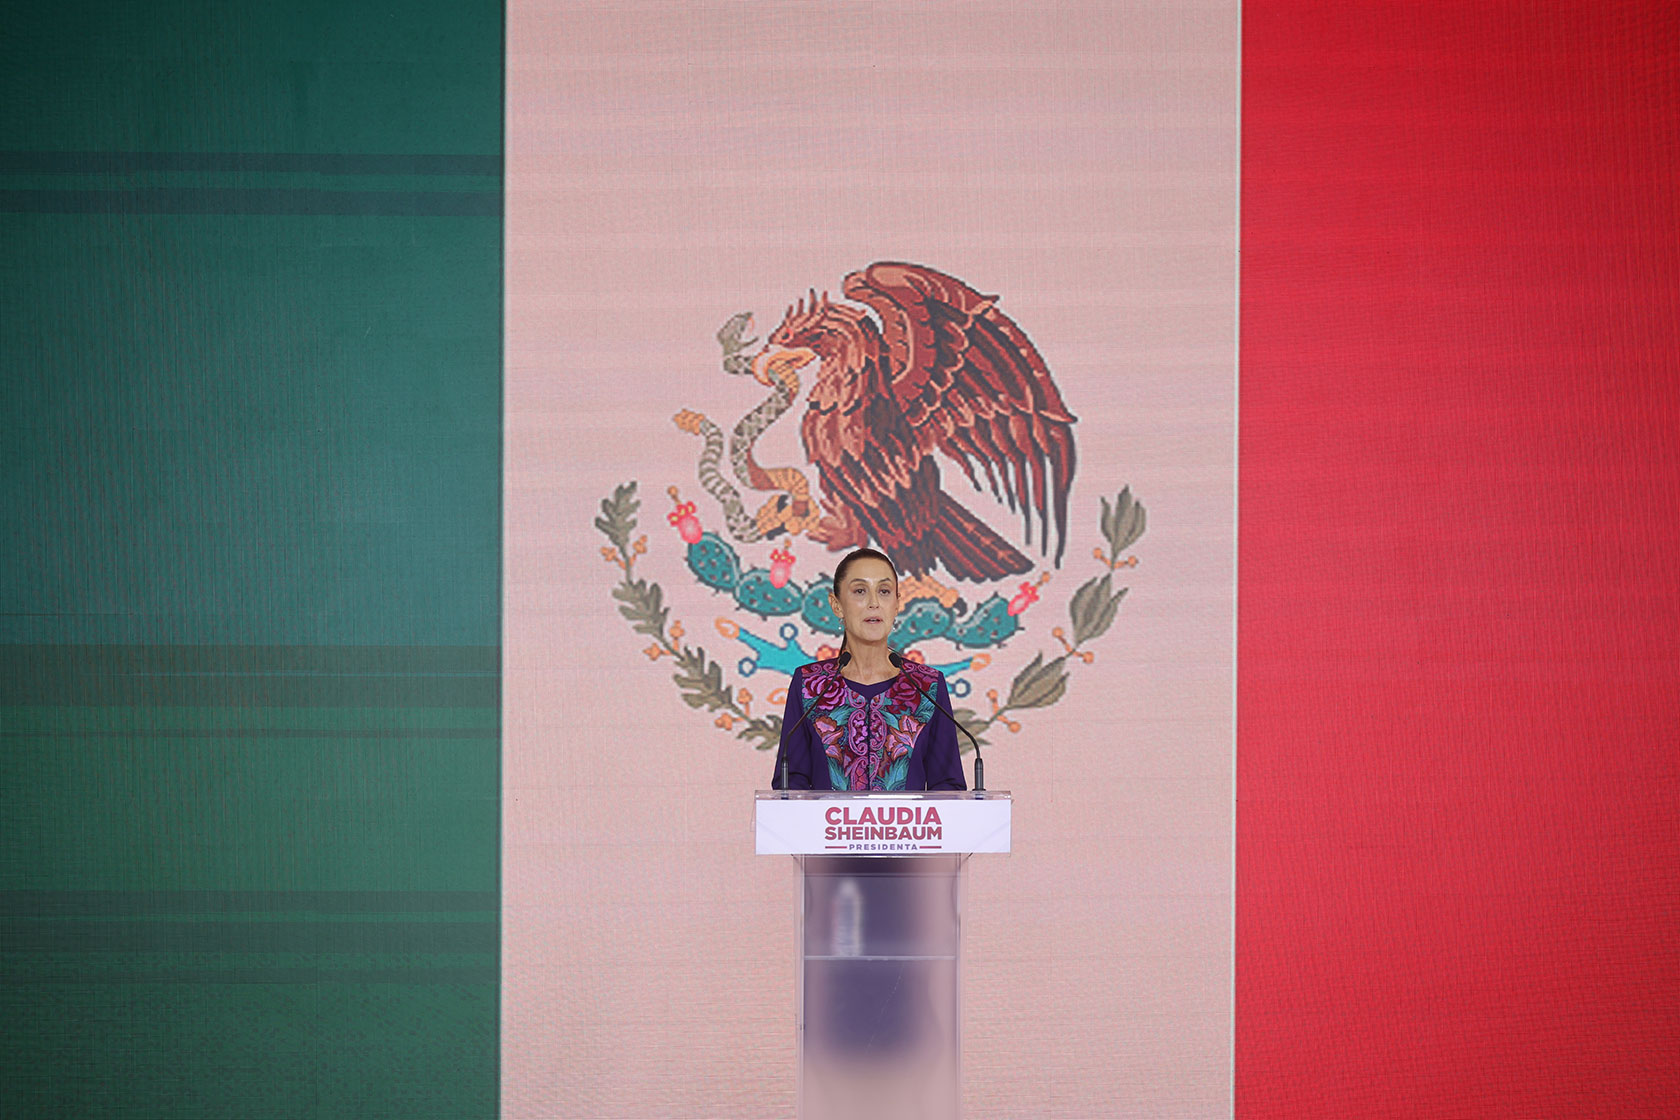 Mexico presidential candidate Claudia Sheinbaum gives a speech at Hilton Hotel in Mexico City.